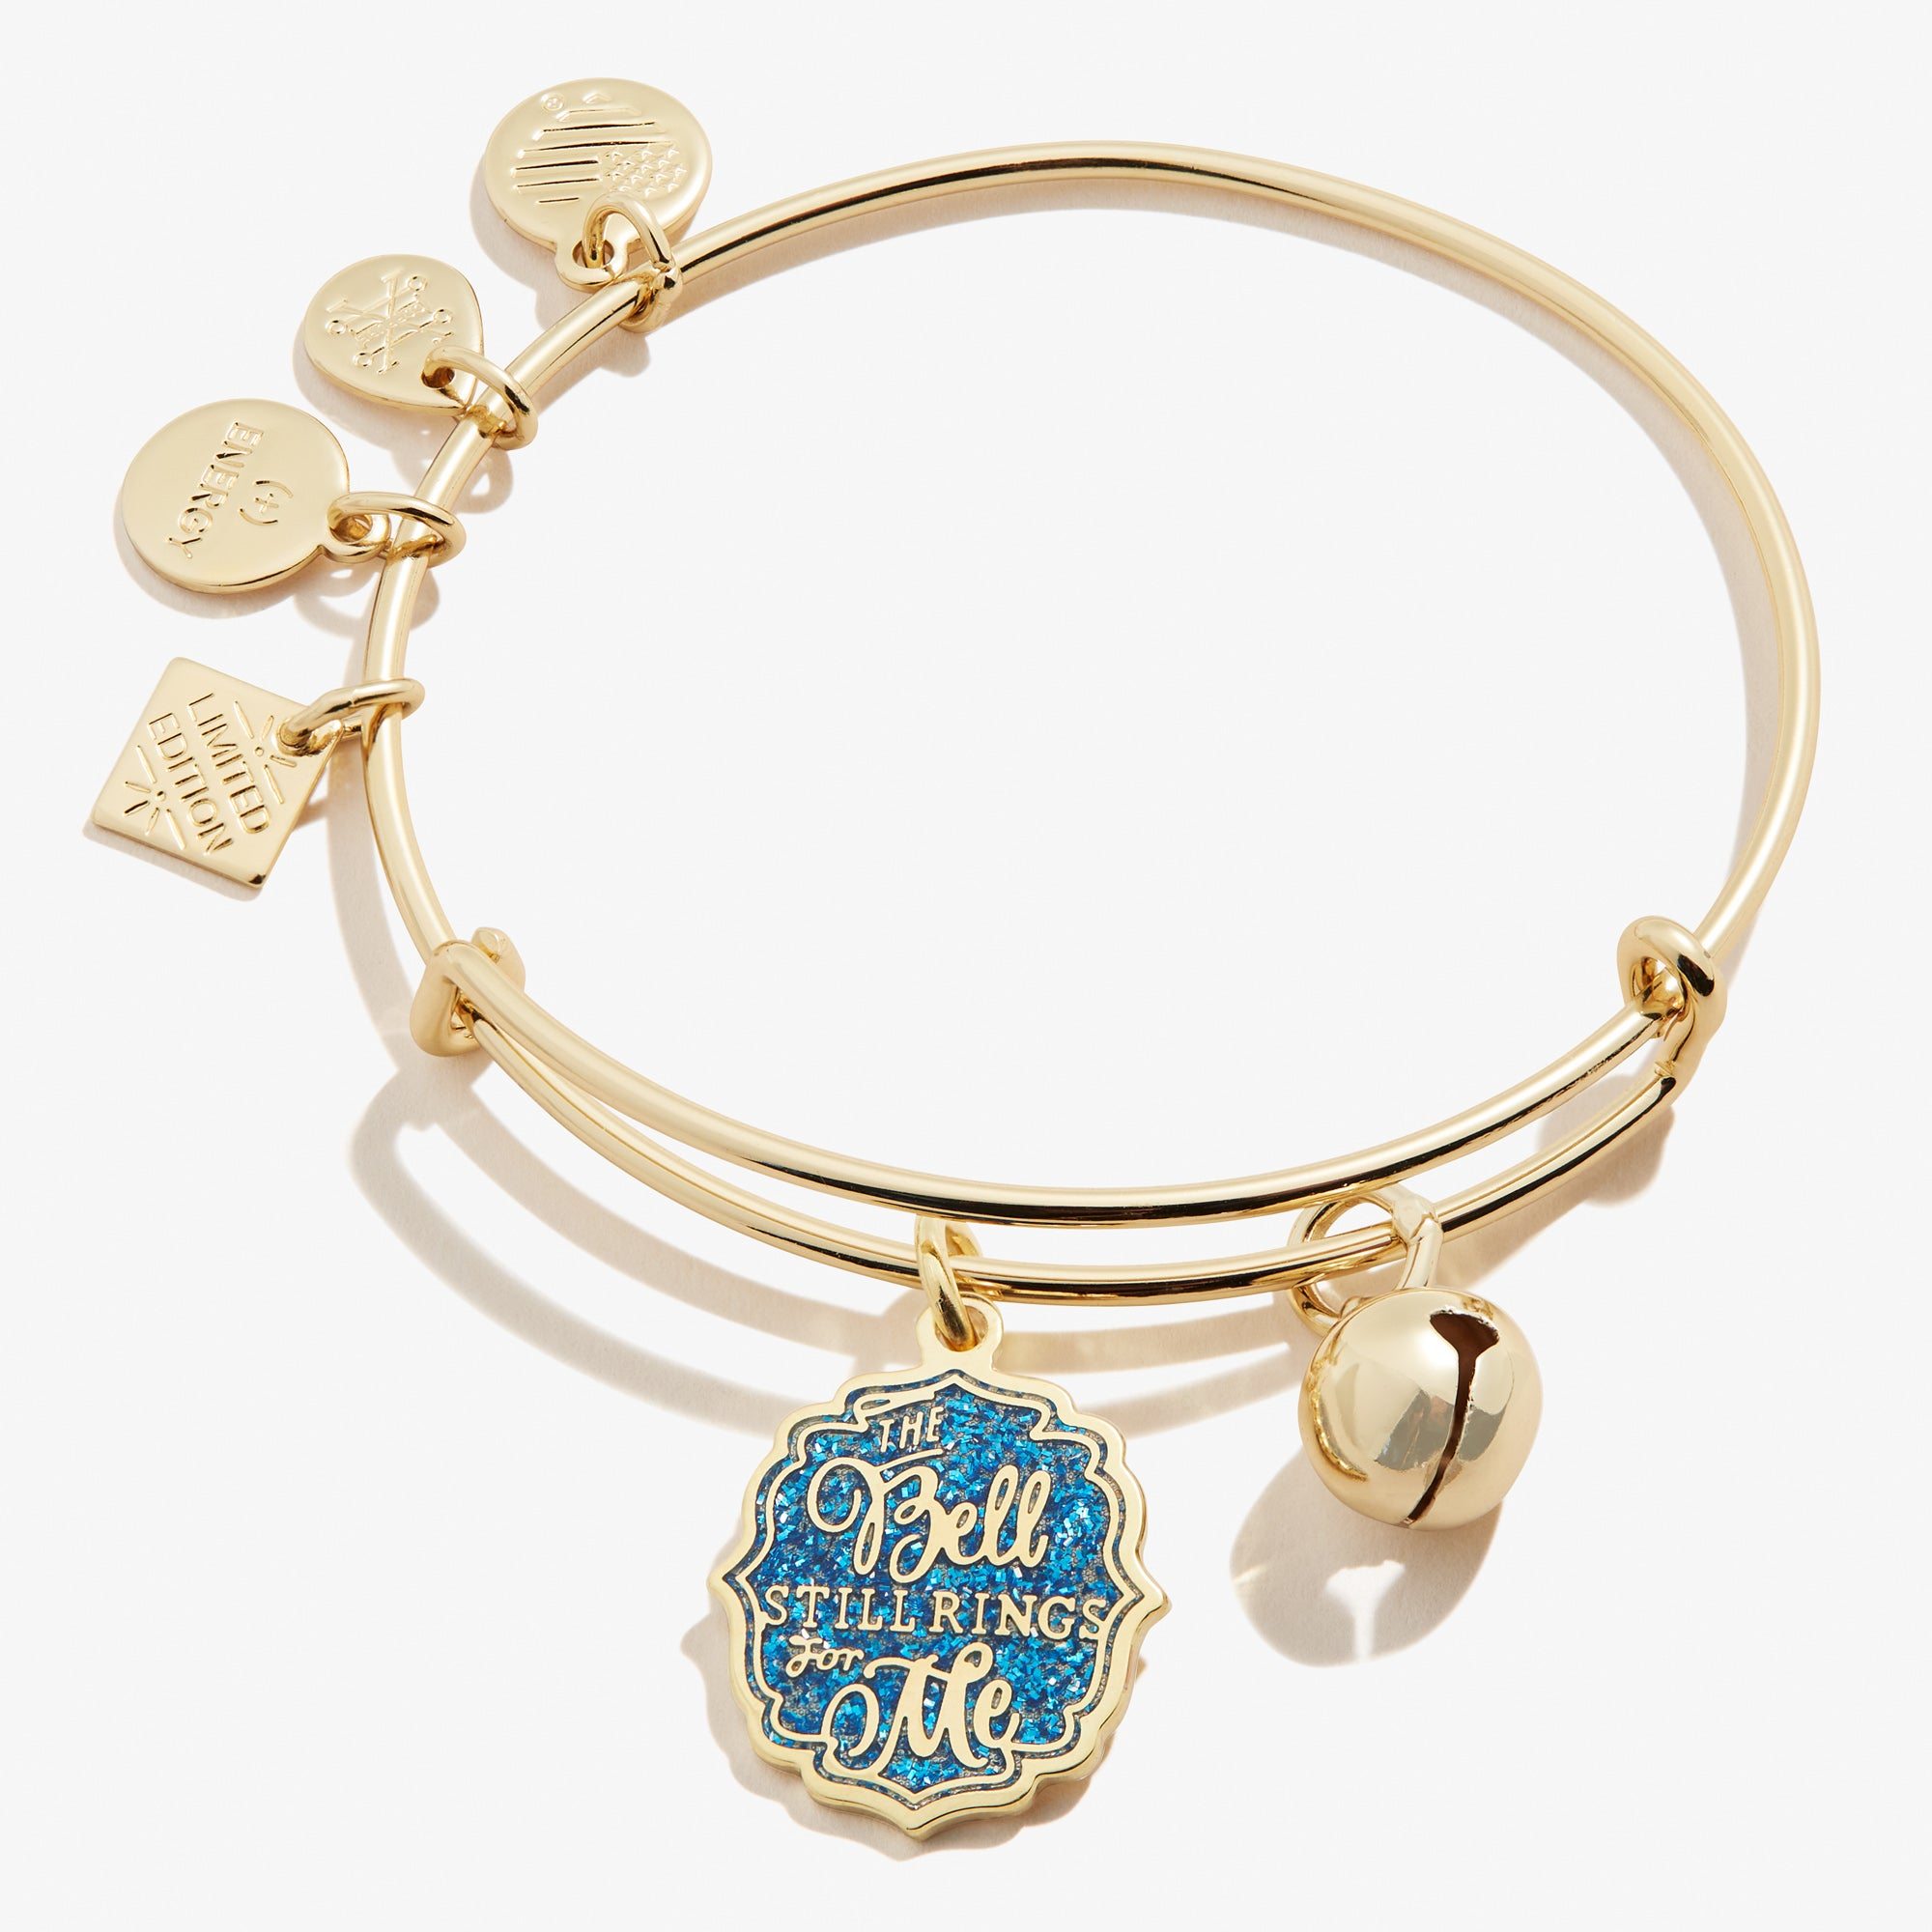 The Polar Express™ 'The Bell Still Rings' Charm Bangle